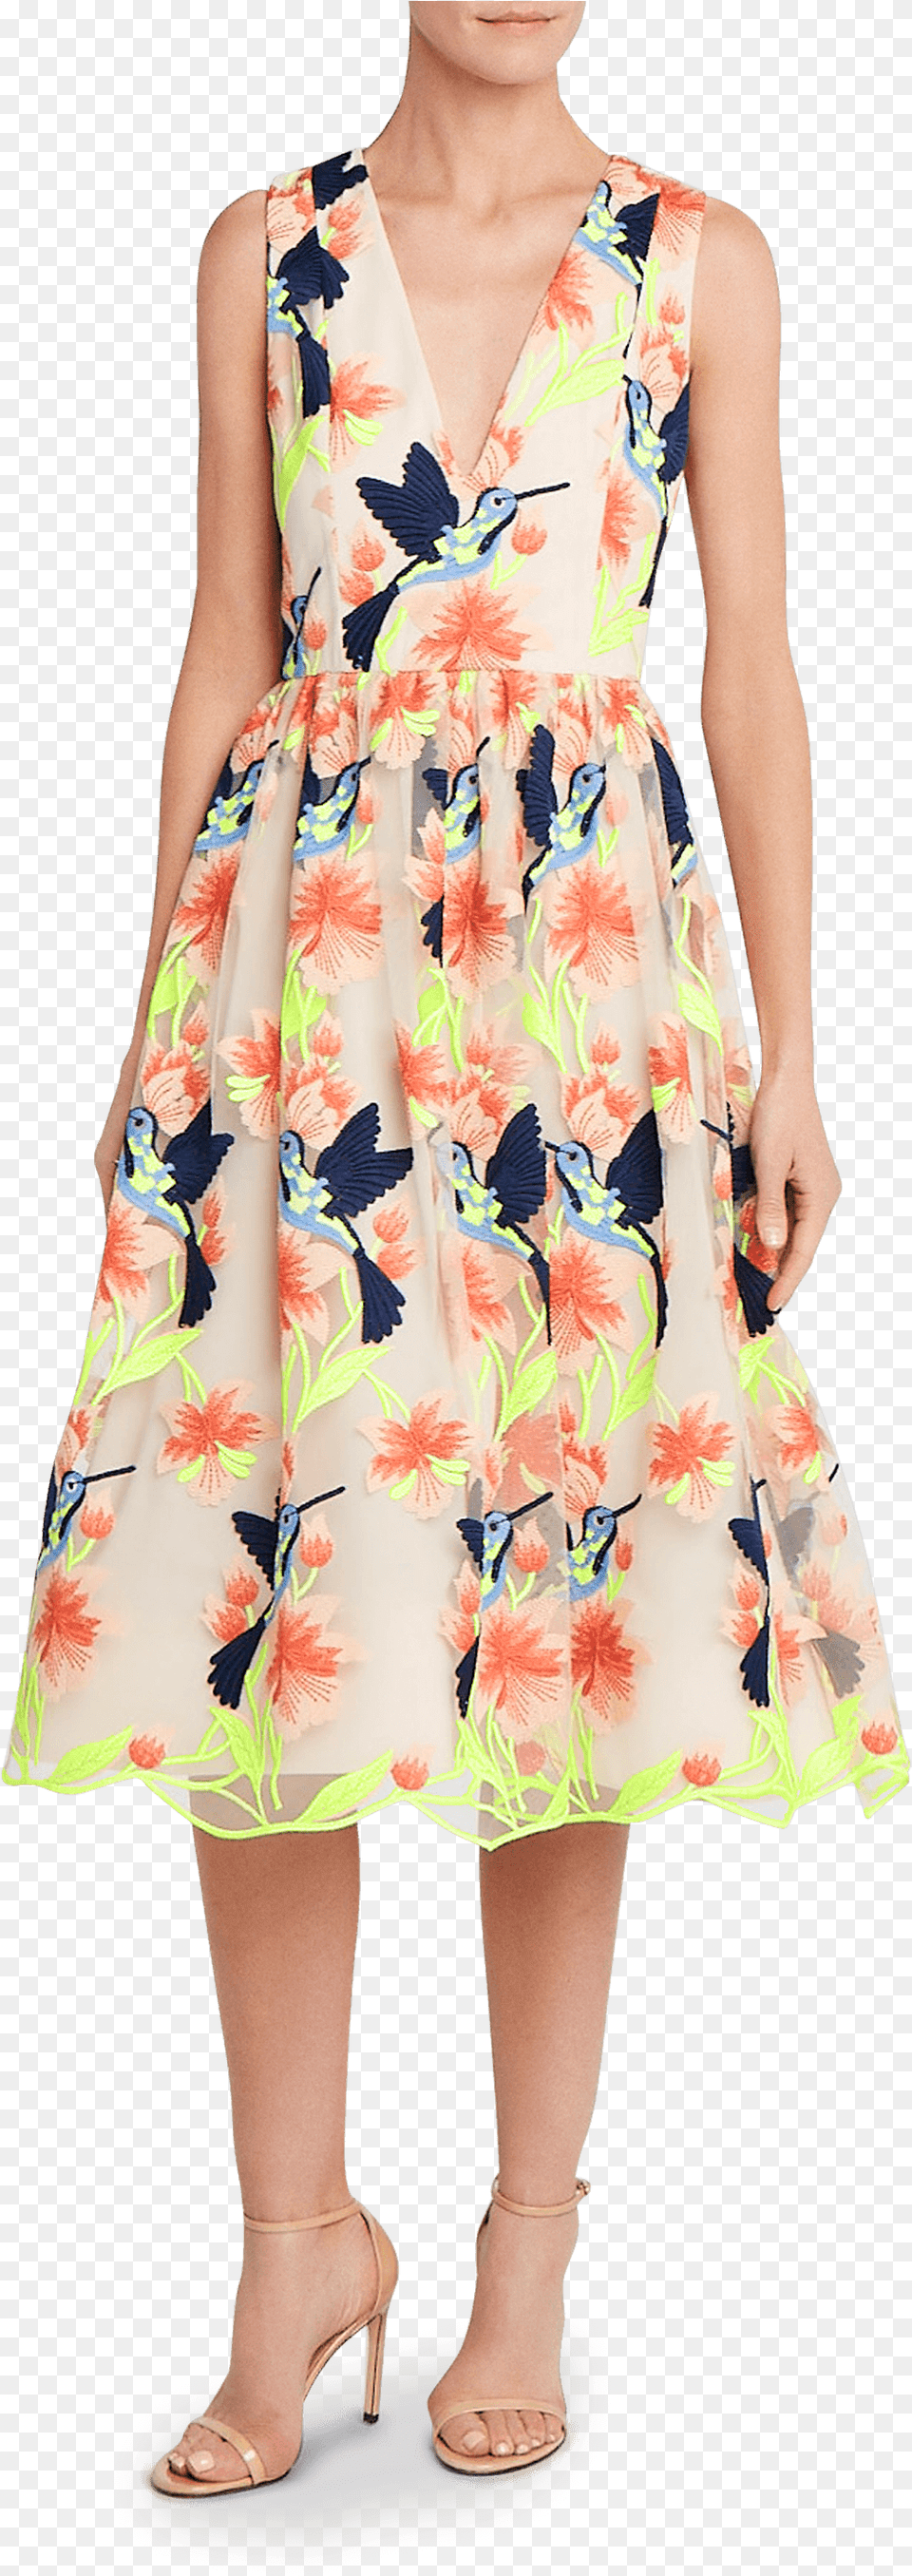 Item Primary Day Dress, Clothing, Beachwear, Child, Person Png Image